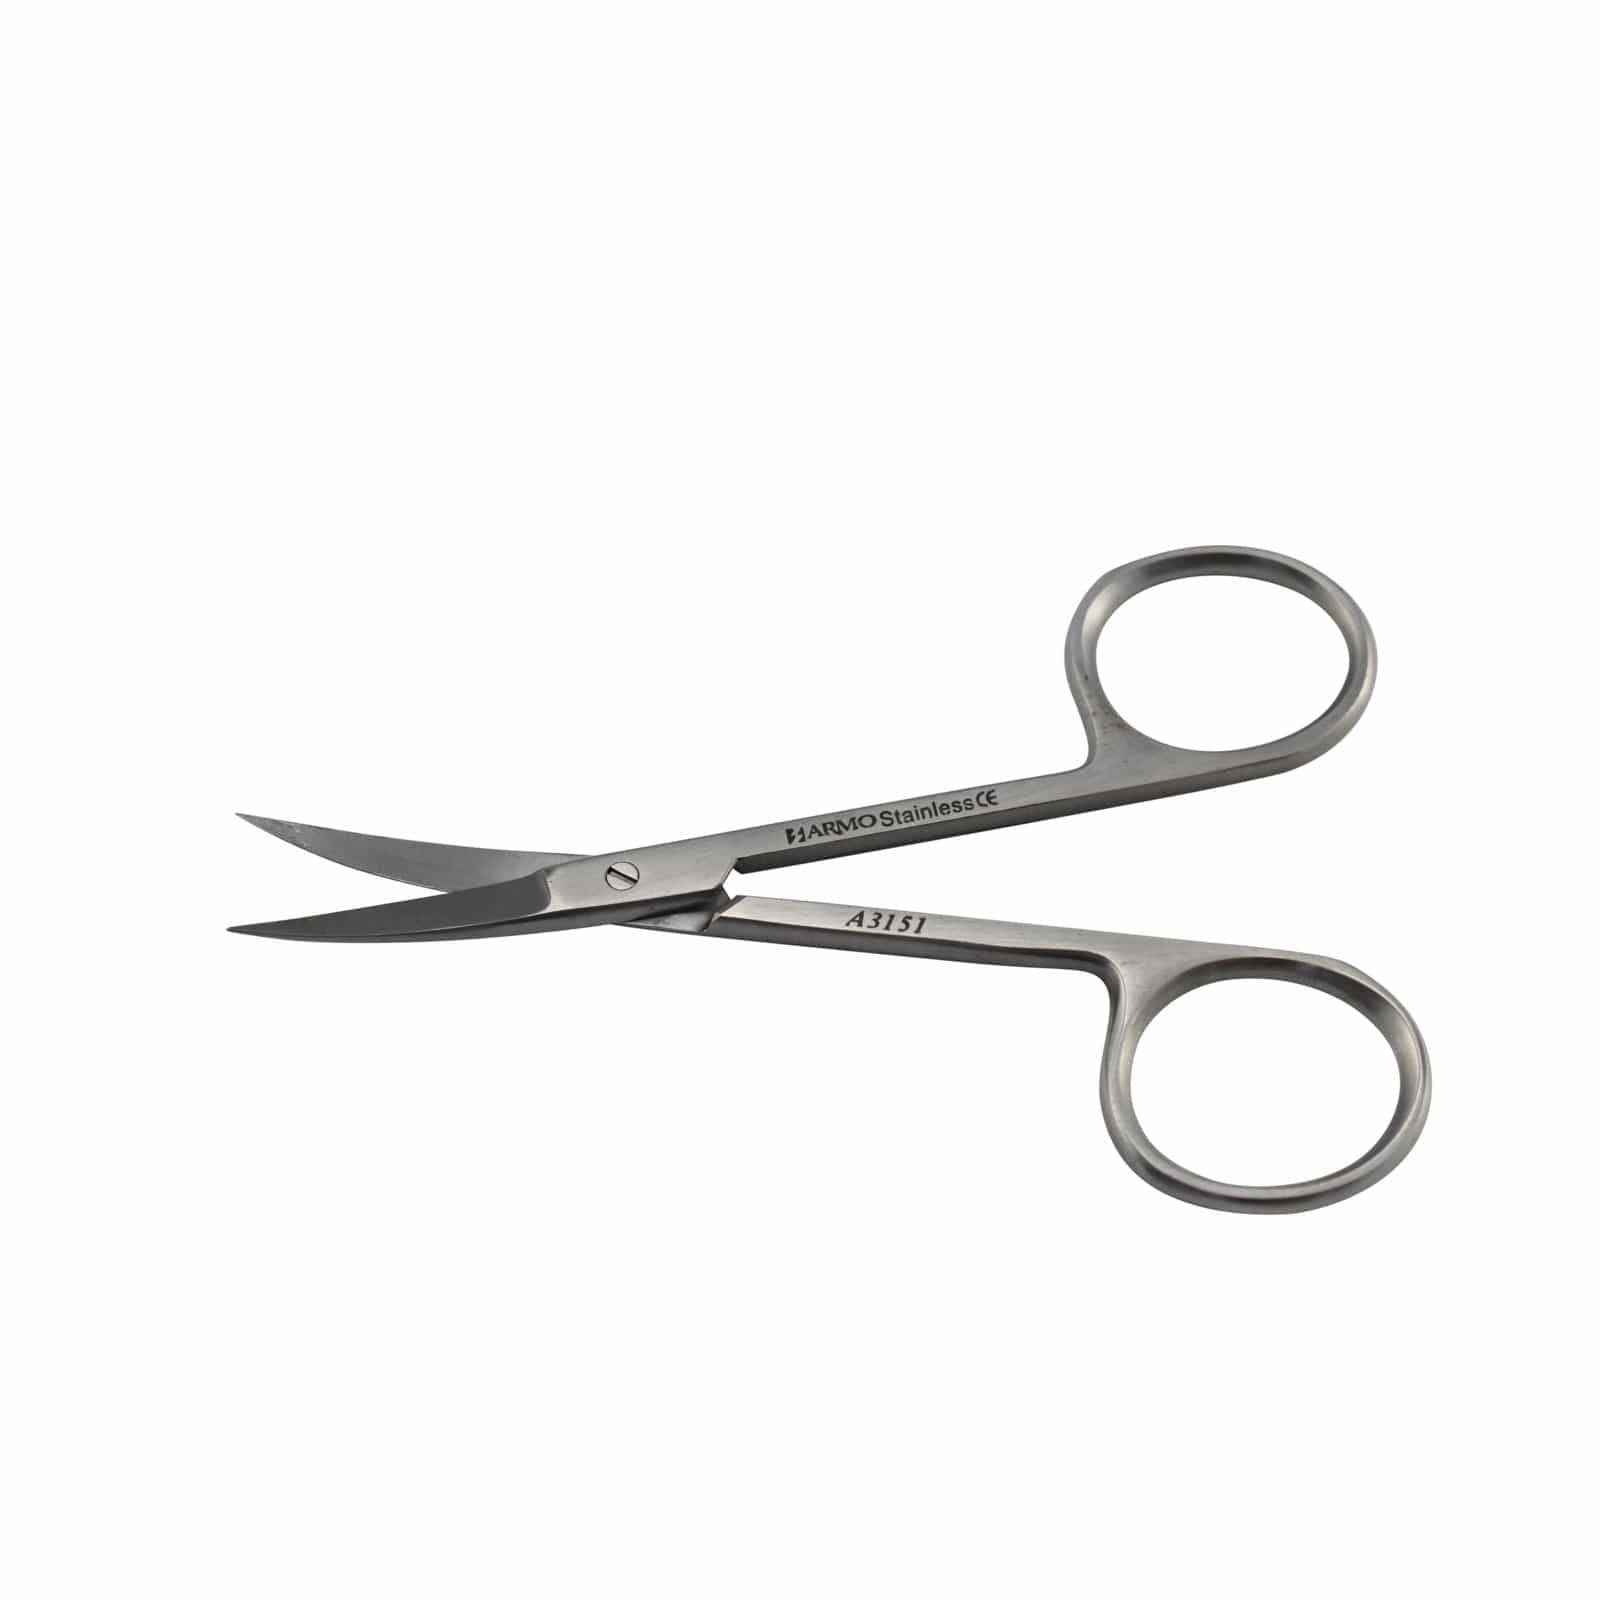 Armo Surgical Instruments 9cm / Curved / Standard Armo Iris Scissors